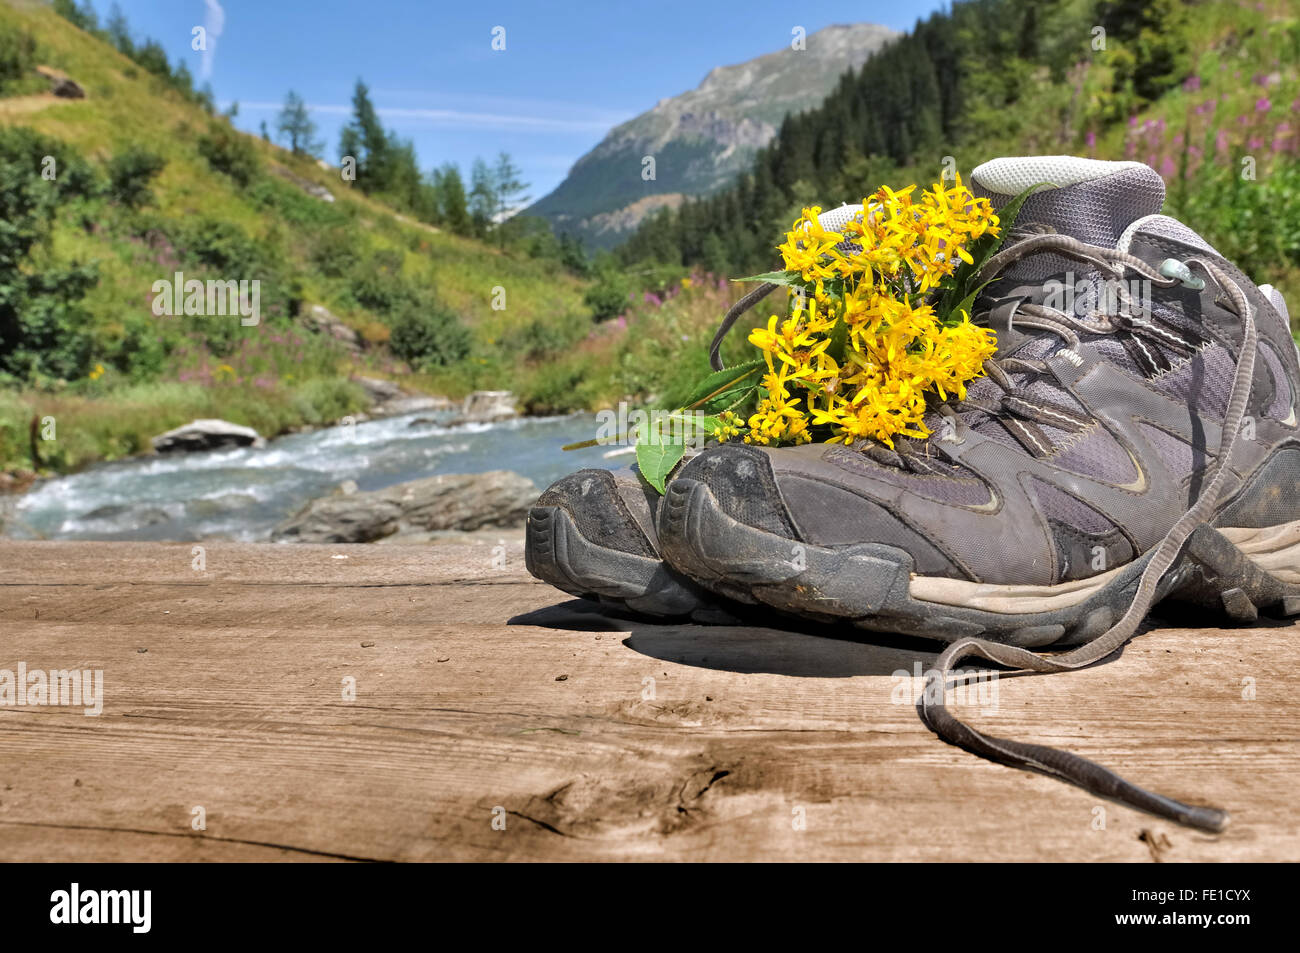 hiking shoes with flowers on bridge crossing a mountain river Stock Photo